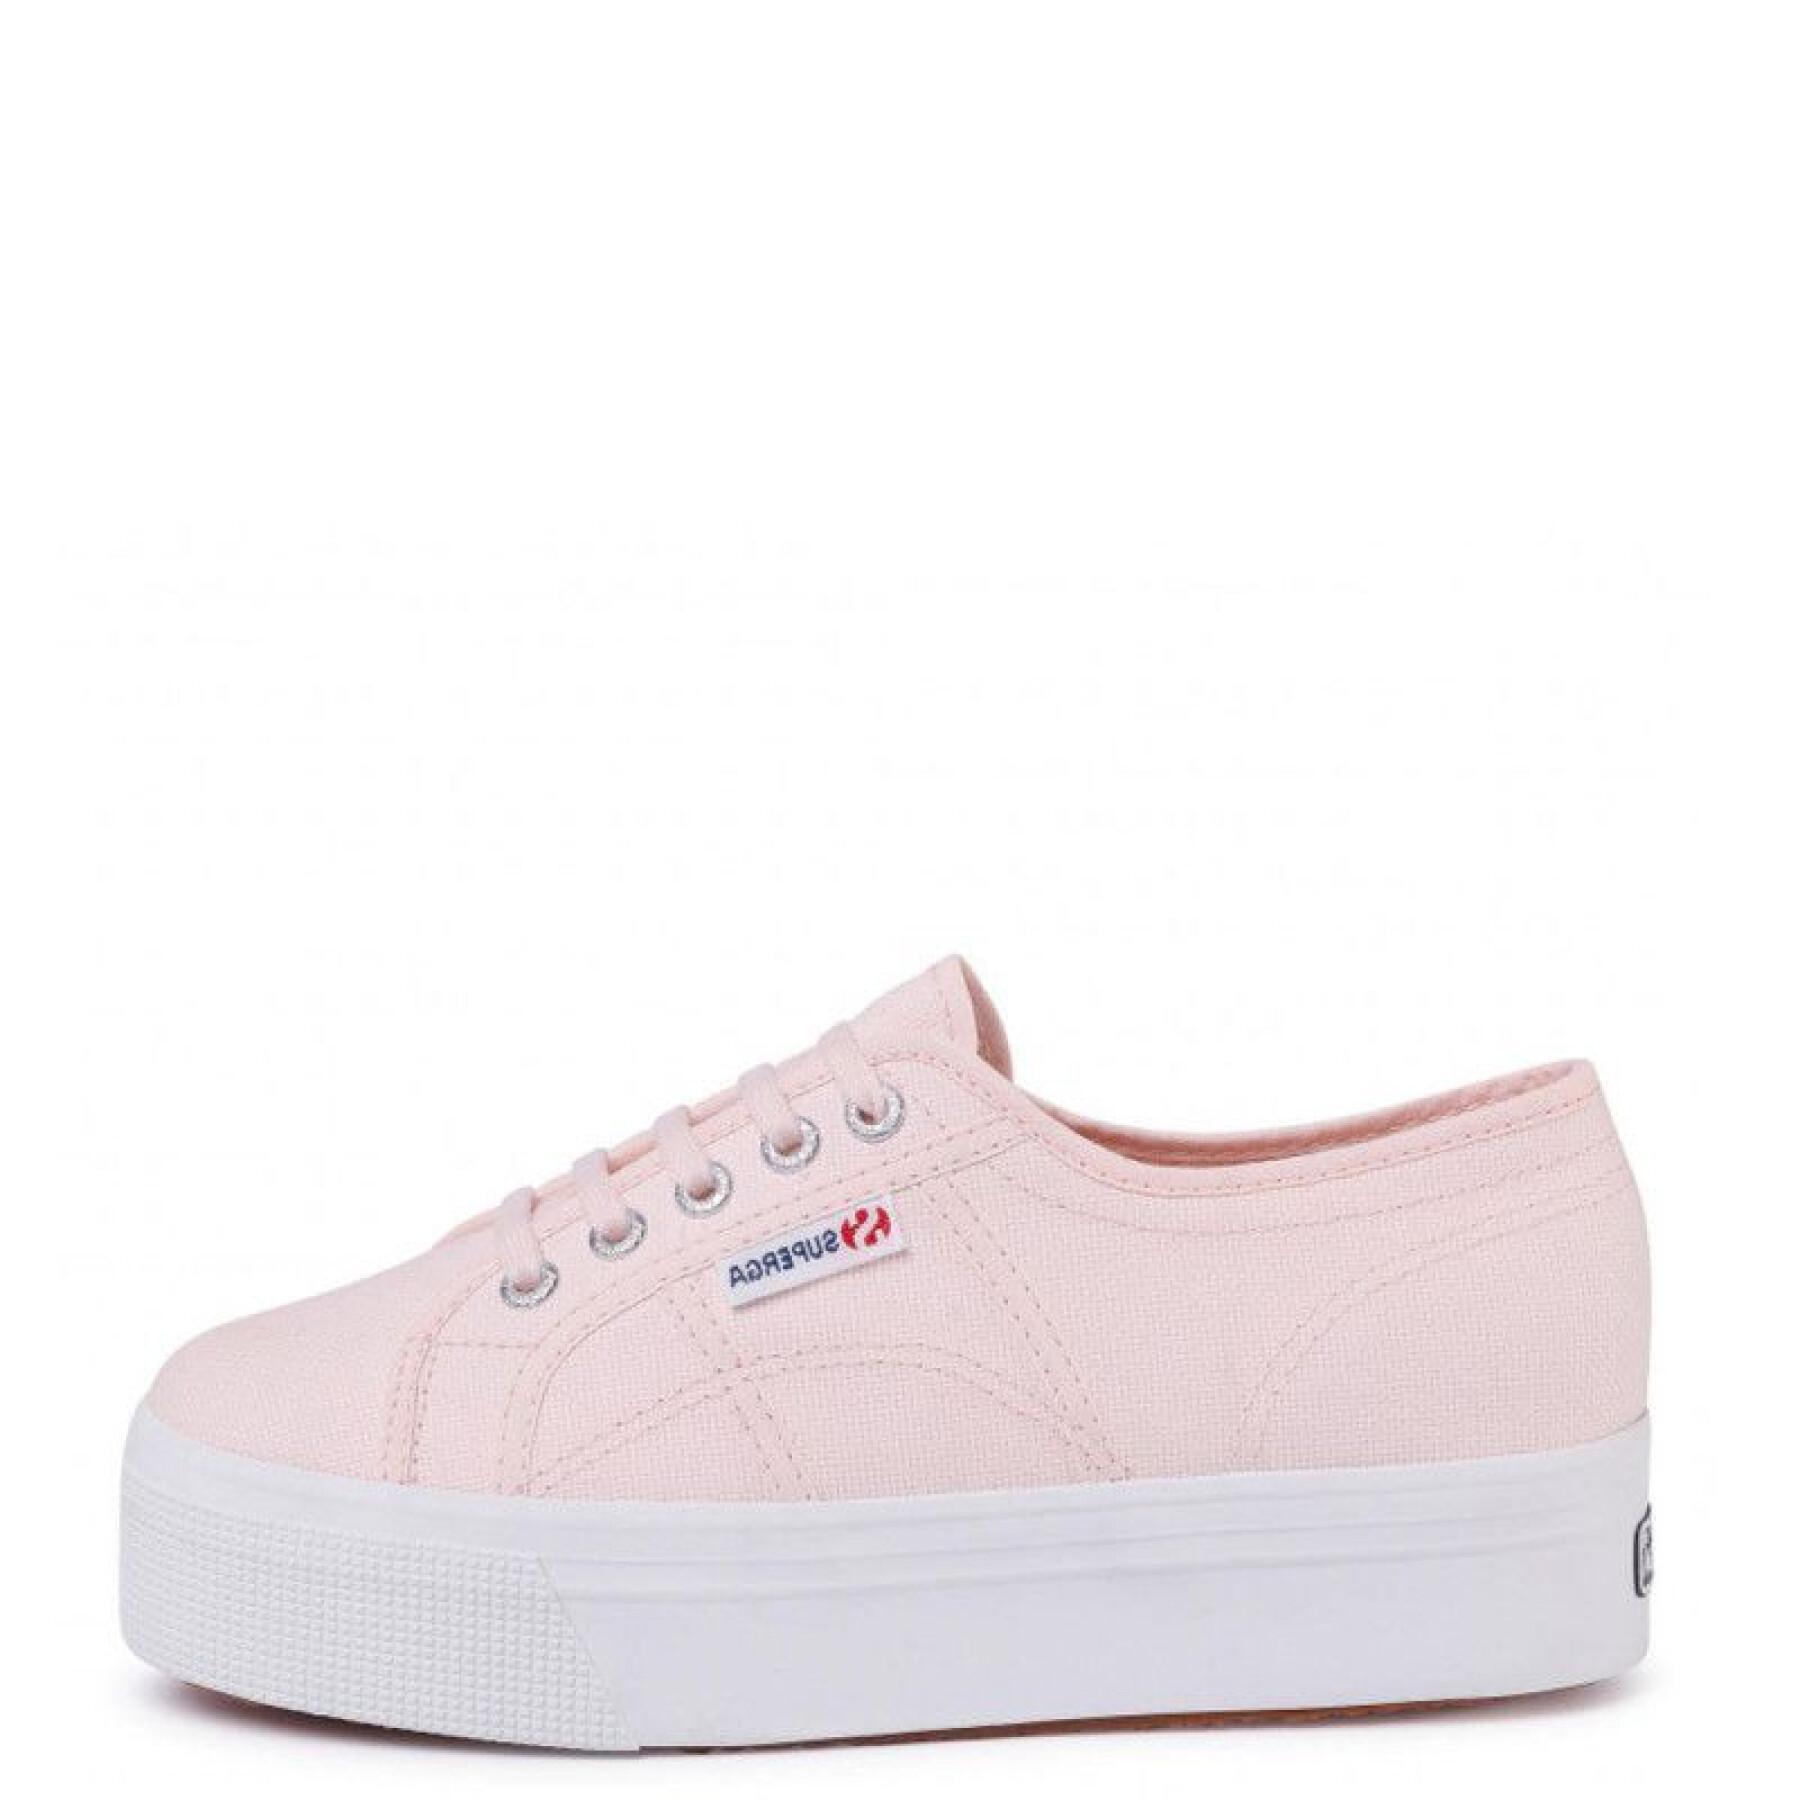 Baskets femme Superga 2790 Acotw Linea Up And Down